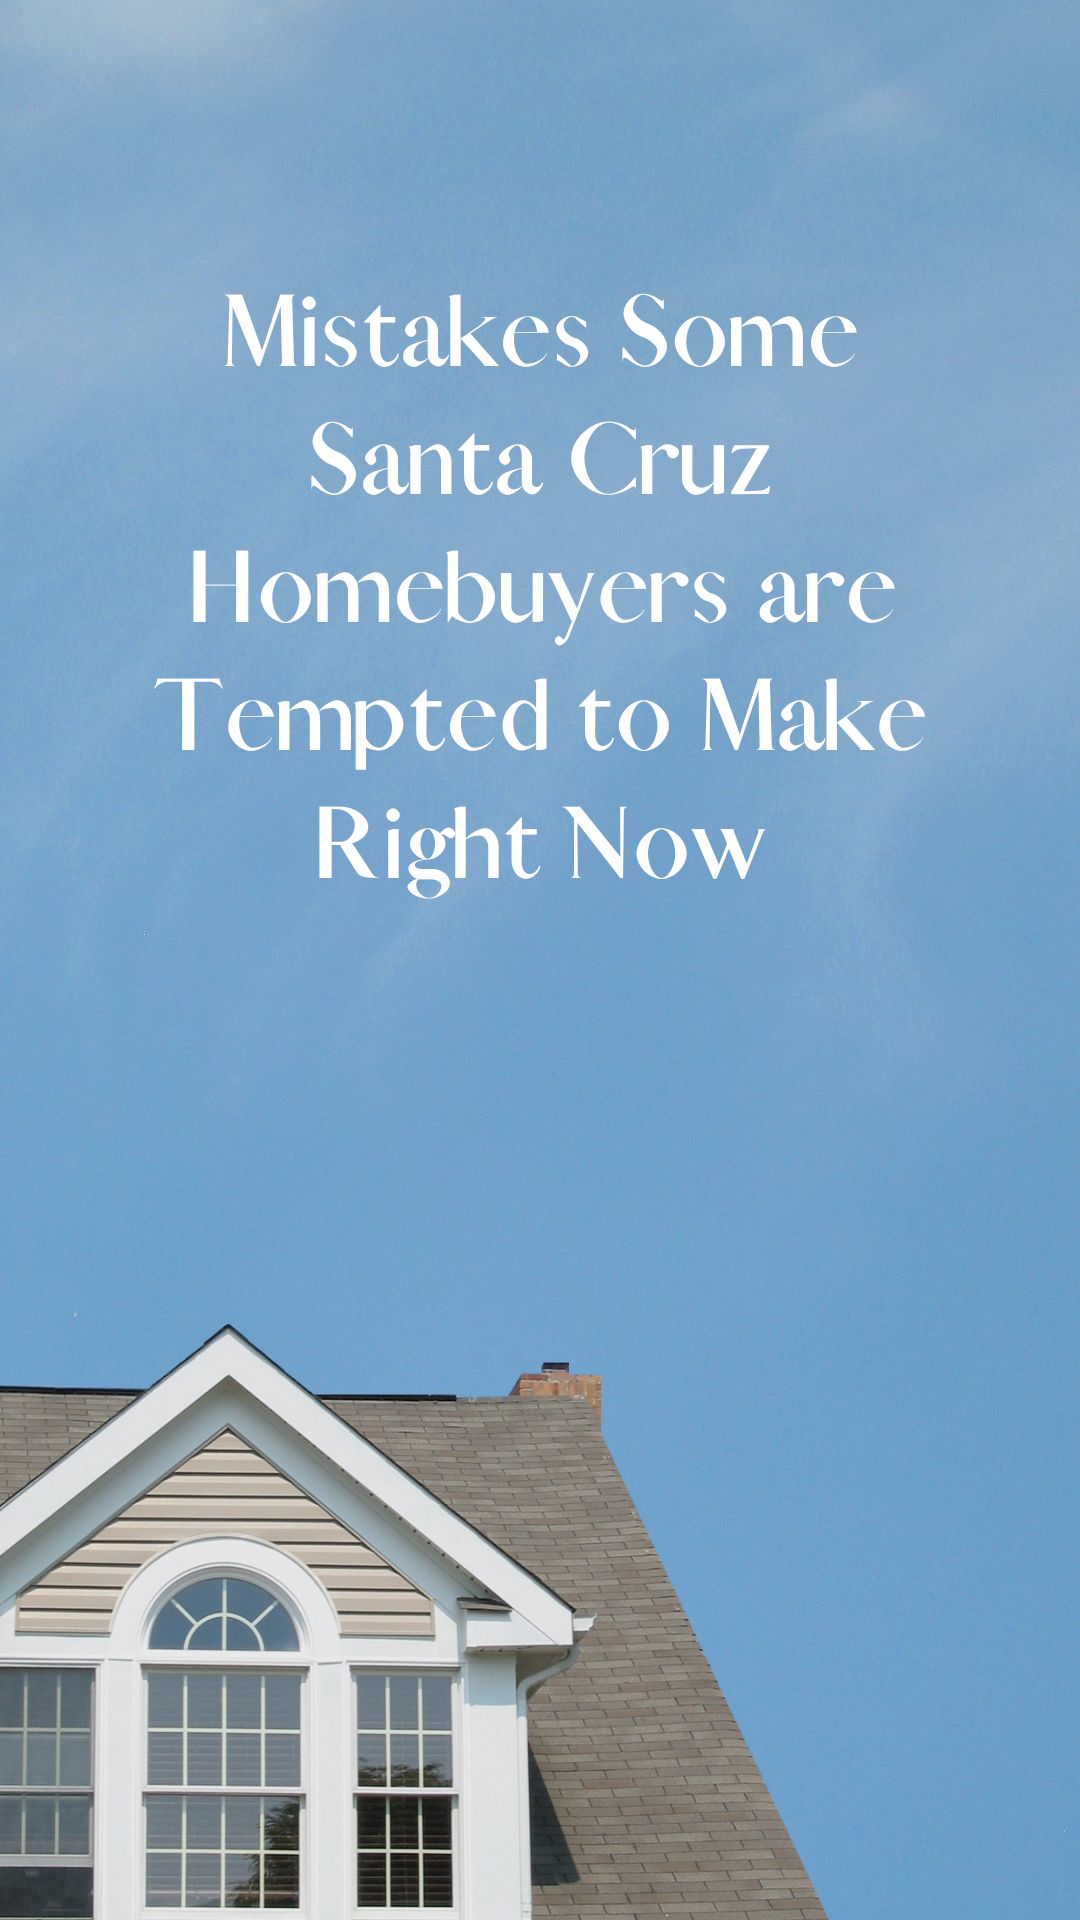 Mistakes Some Santa Cruz Homebuyers are Tempted to Make Right Now